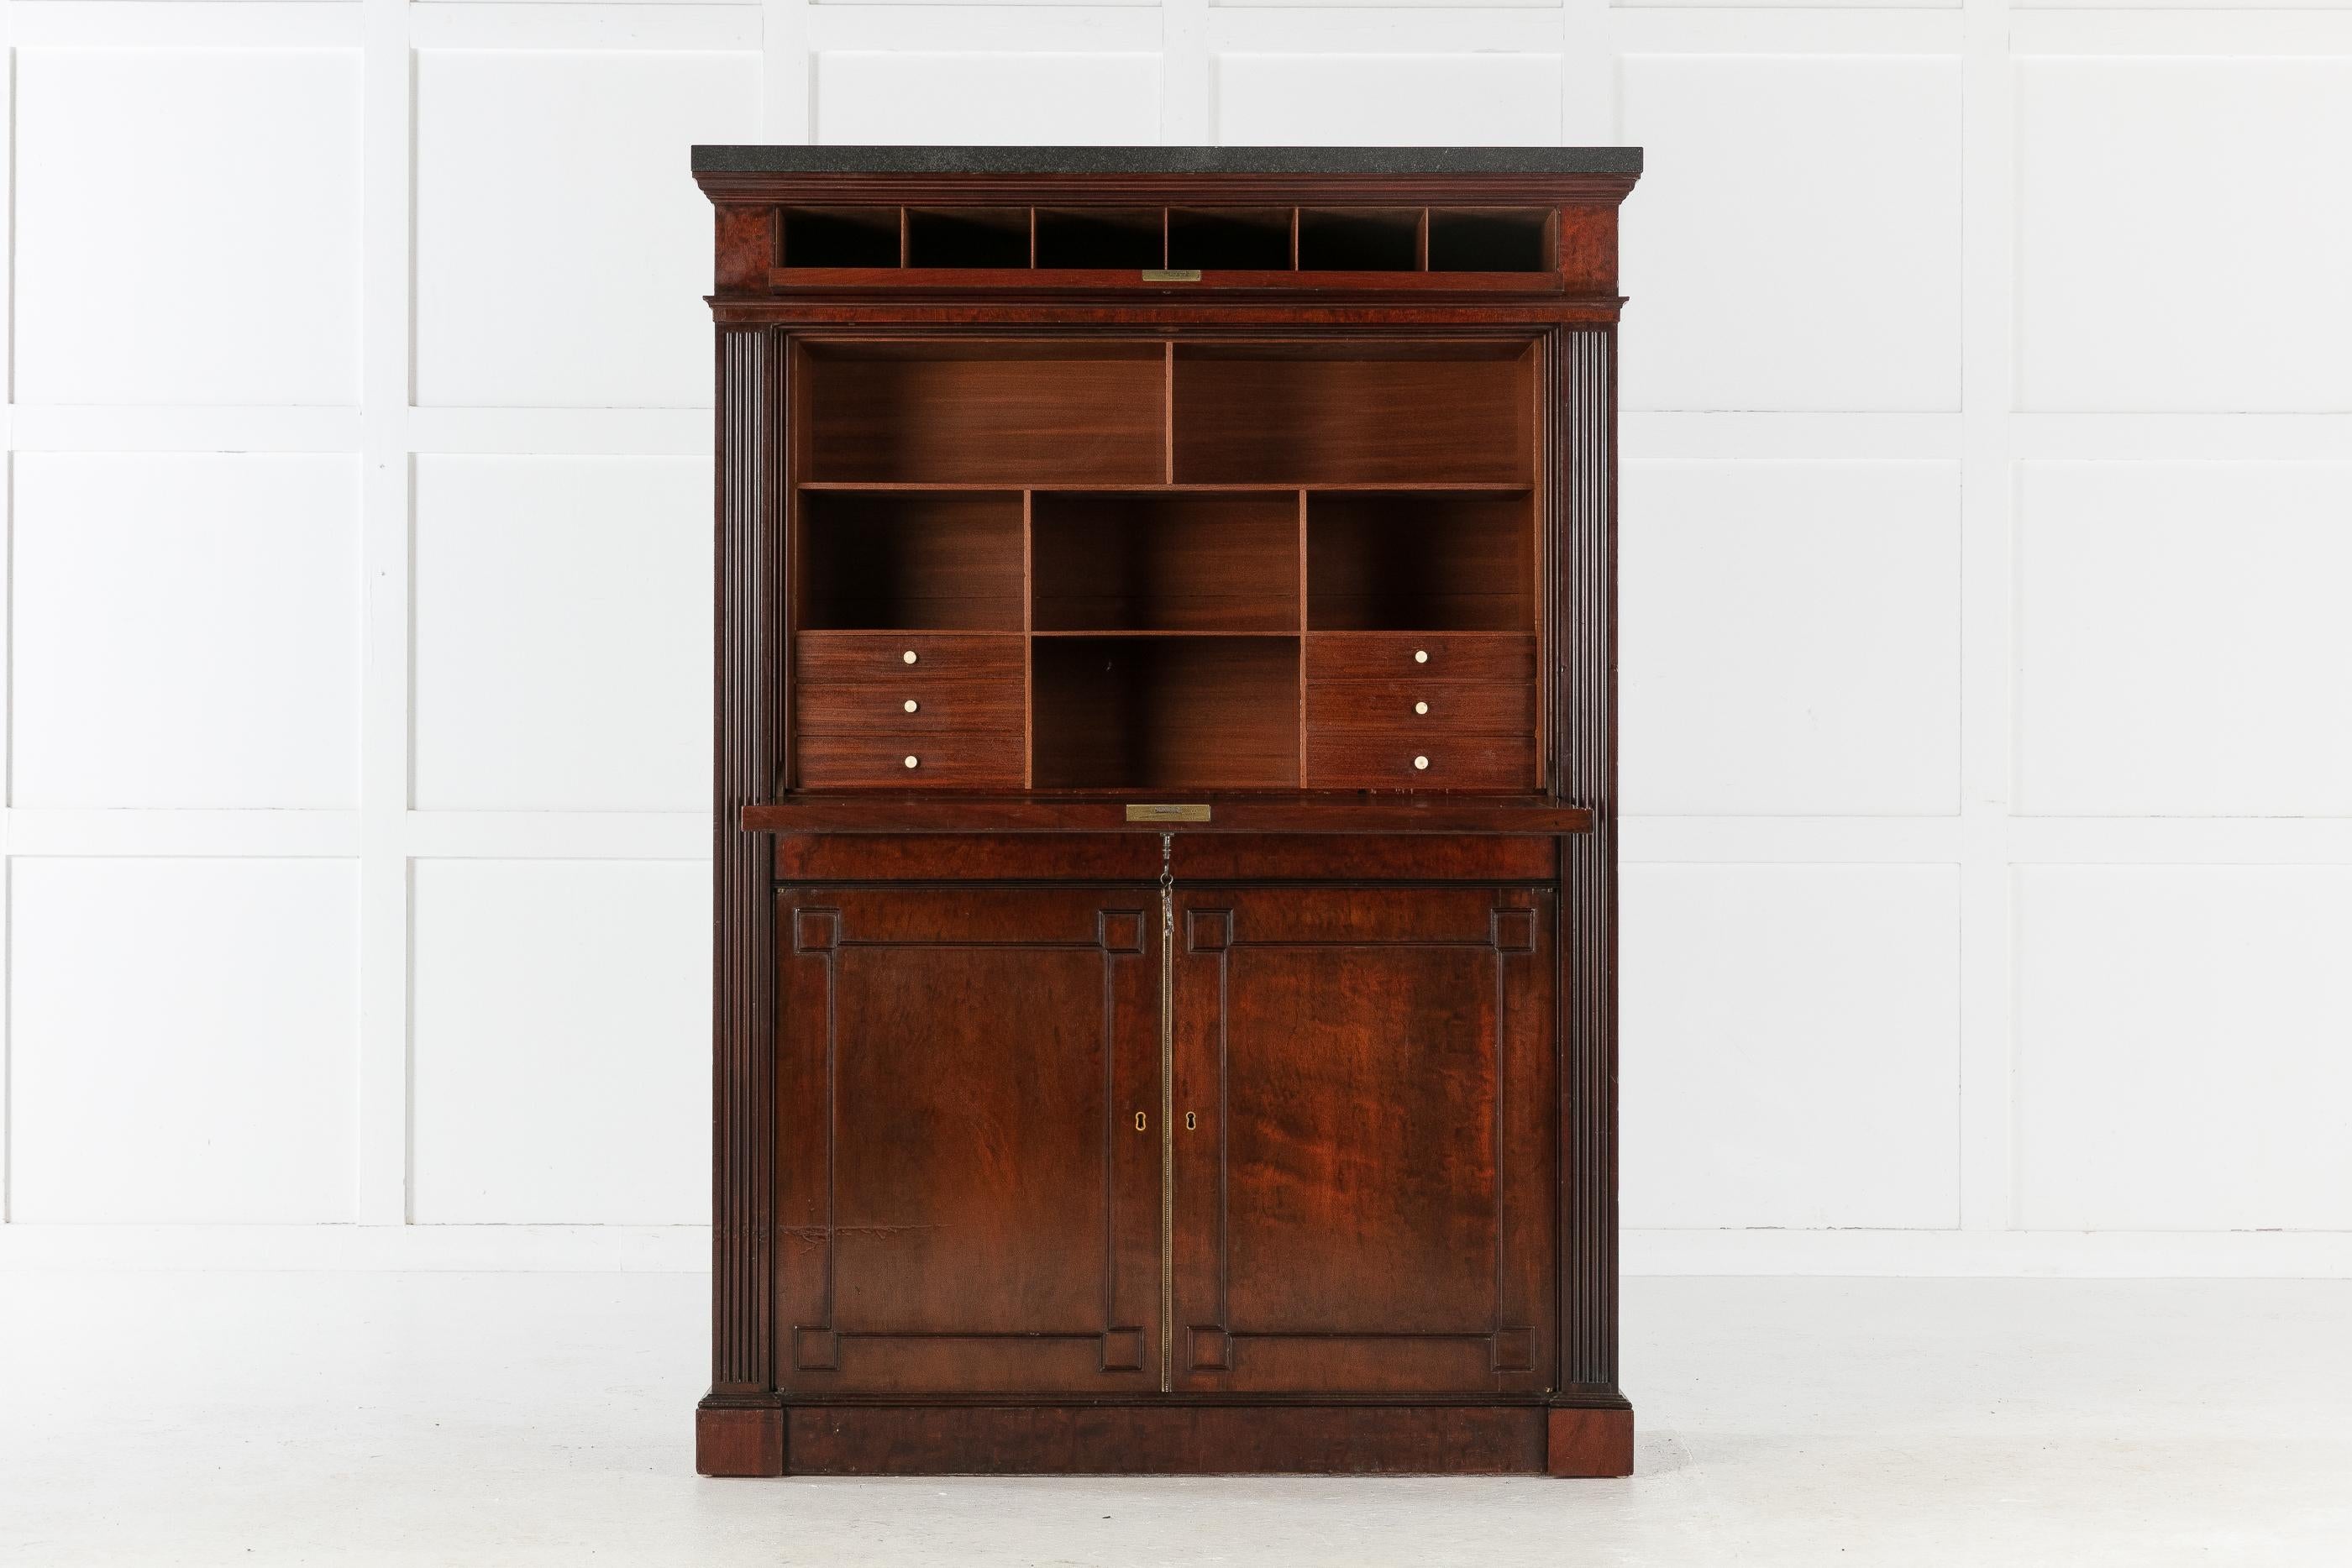 Regency fiddleback mahogany secretaire à abattant in the manor of Gillows, with a black slate top. A cantilevered fall front, having typical Gillow mouldings, opens to reveal several drawers and pigeon holes, and an original blue leather writing